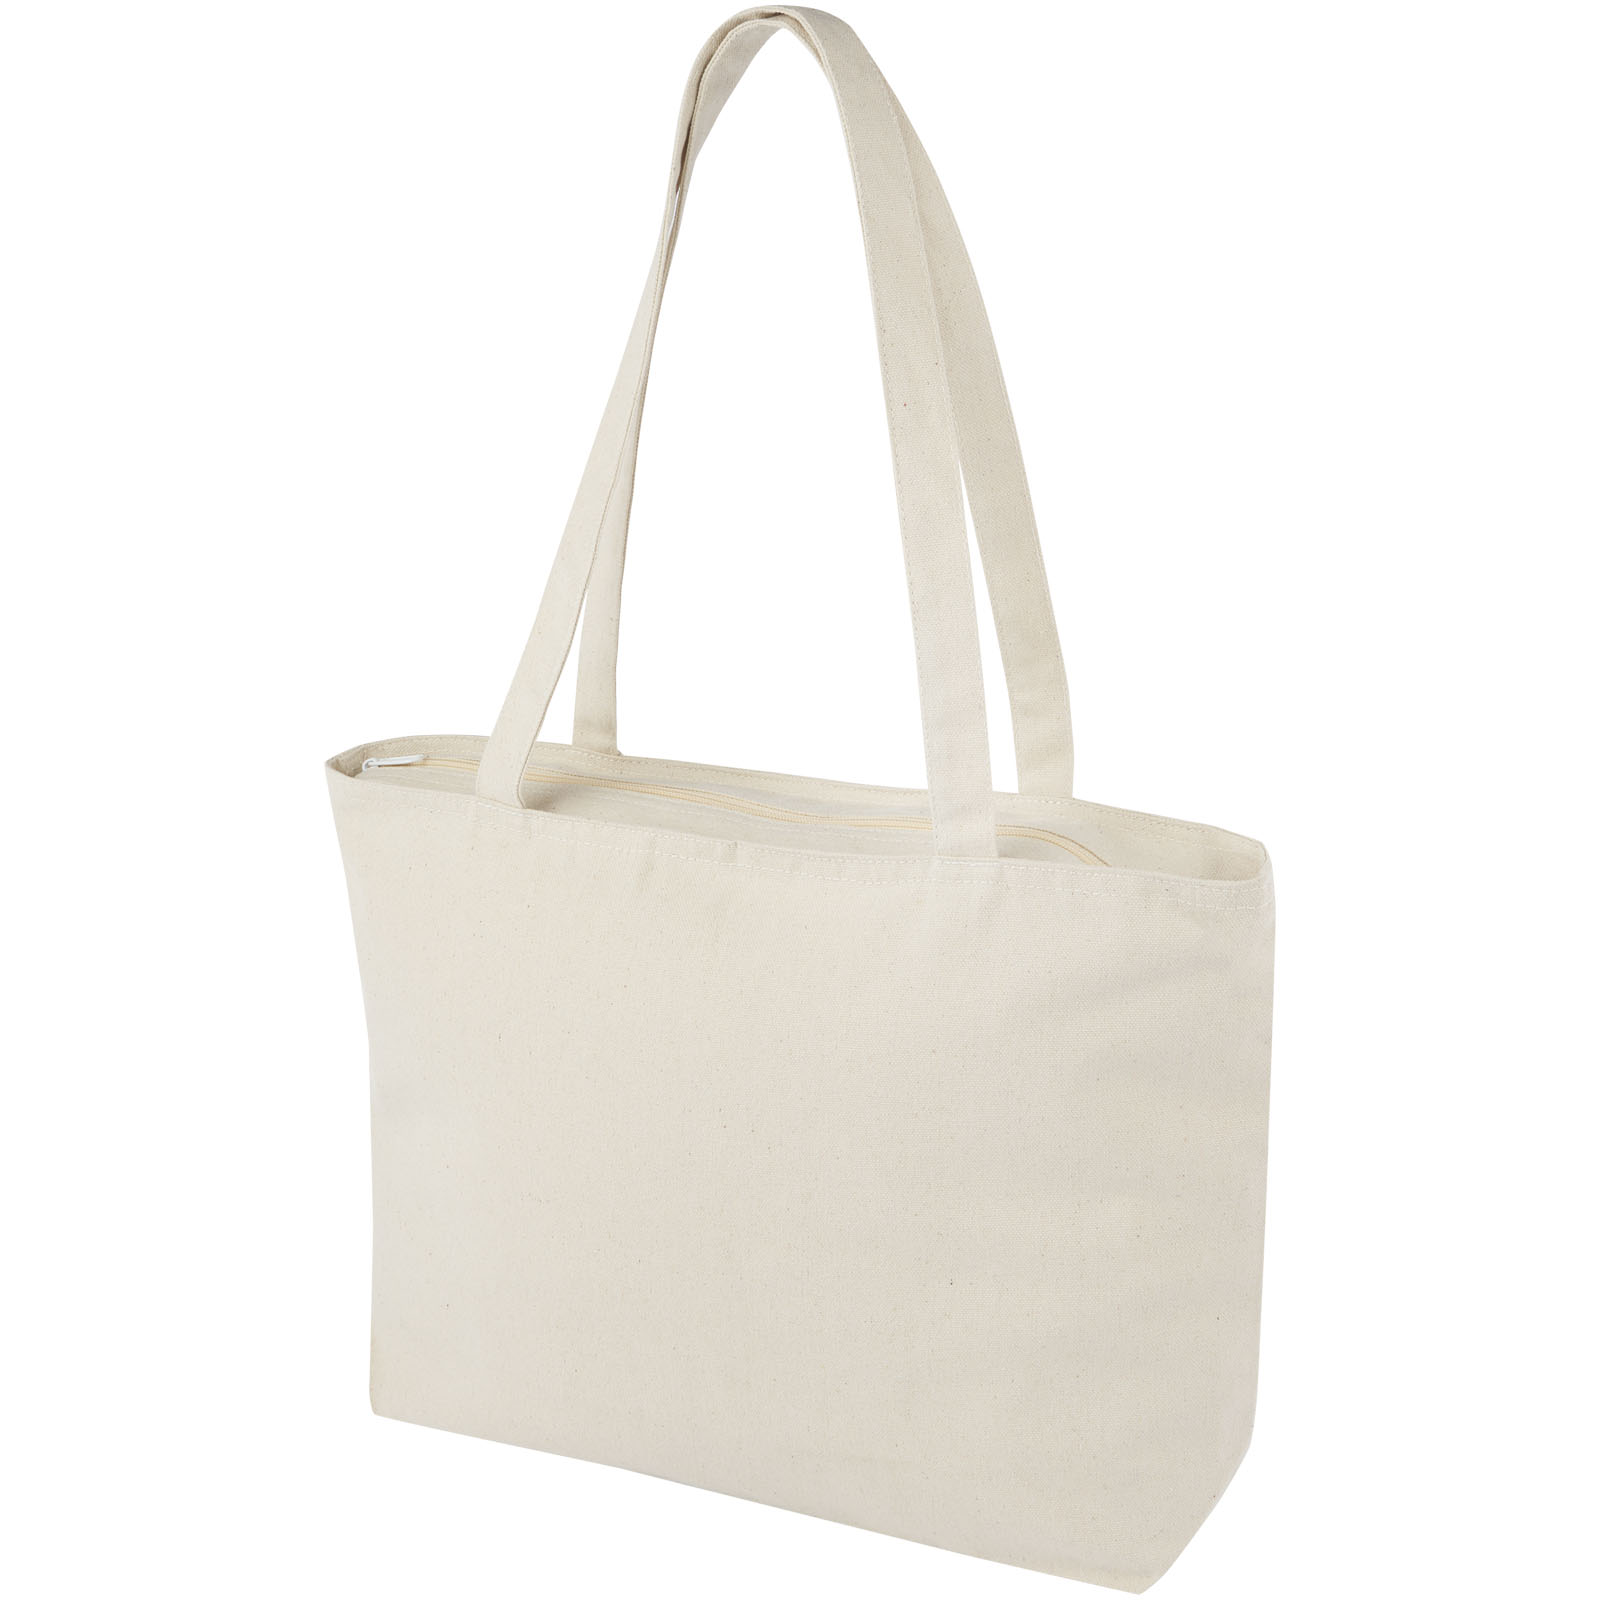 Advertising Cotton Bags - Ningbo 320 g/m² zippered cotton tote bag 15L